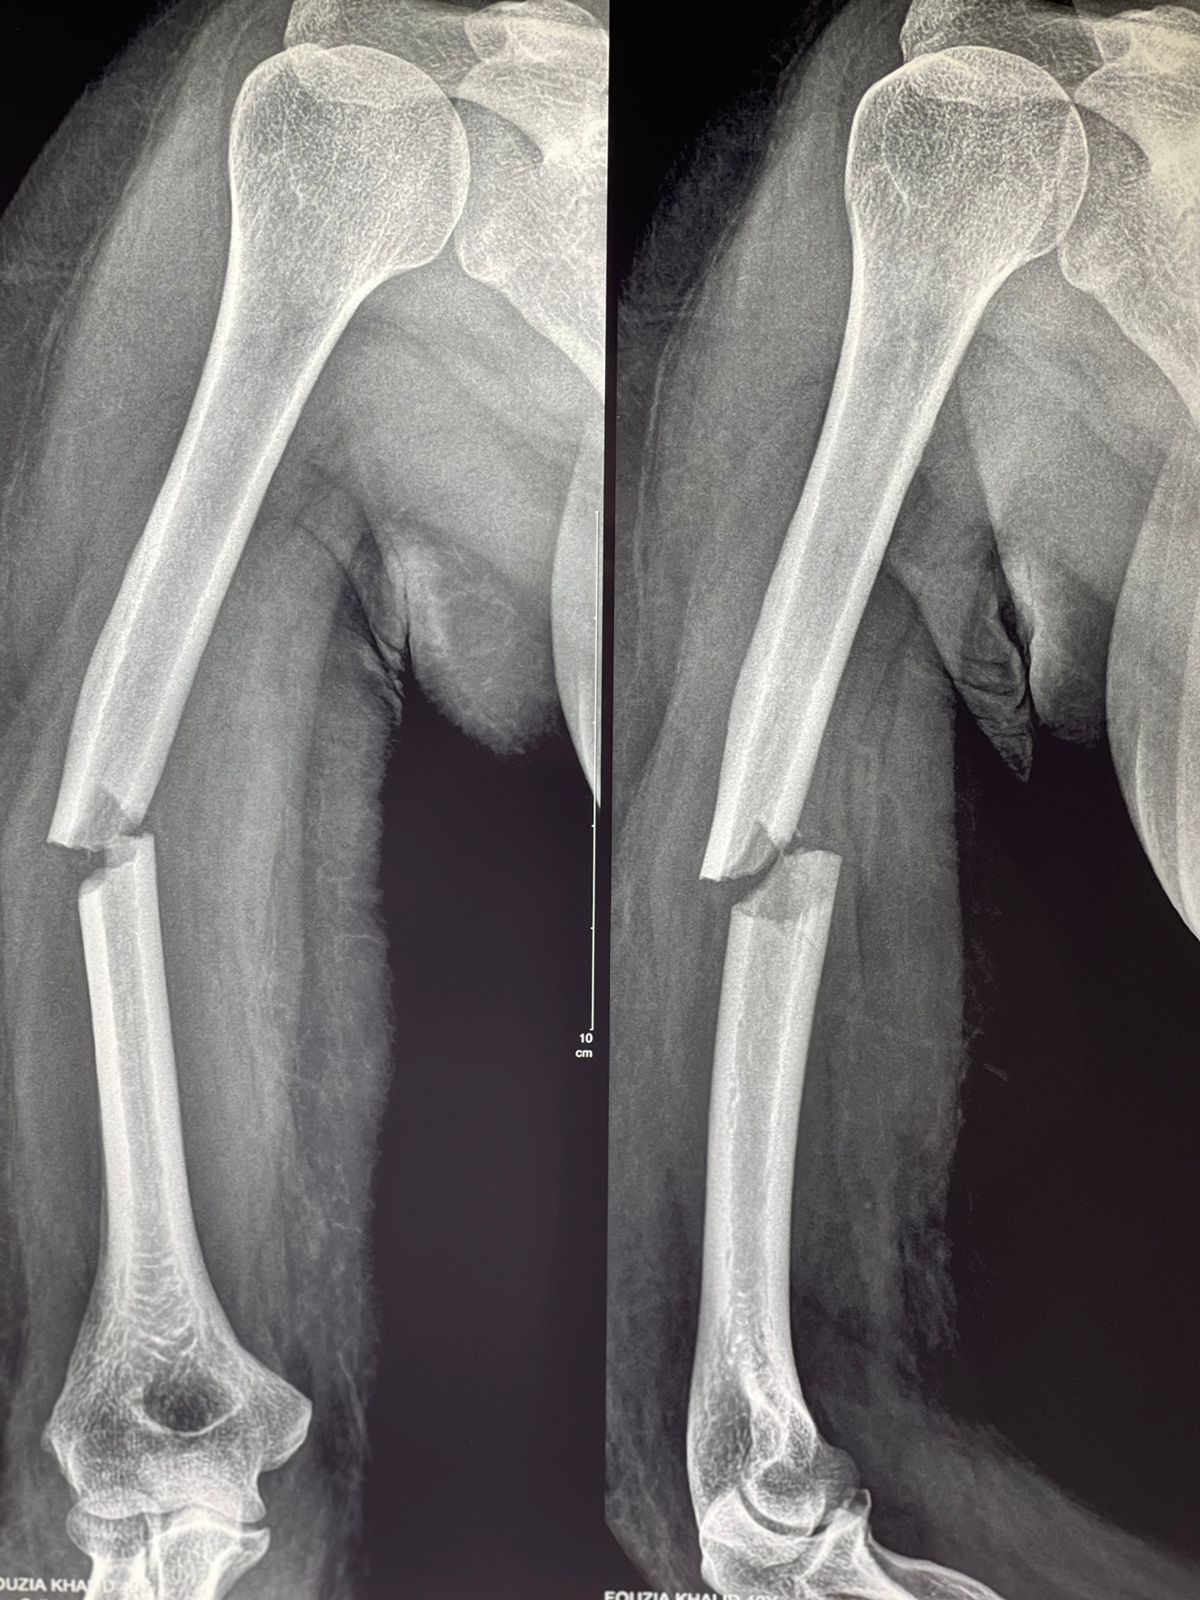 <p>Oblique Humeral Shaft Fracture. This radiograph shows an oblique, displaced middle-third humeral fracture.</p>